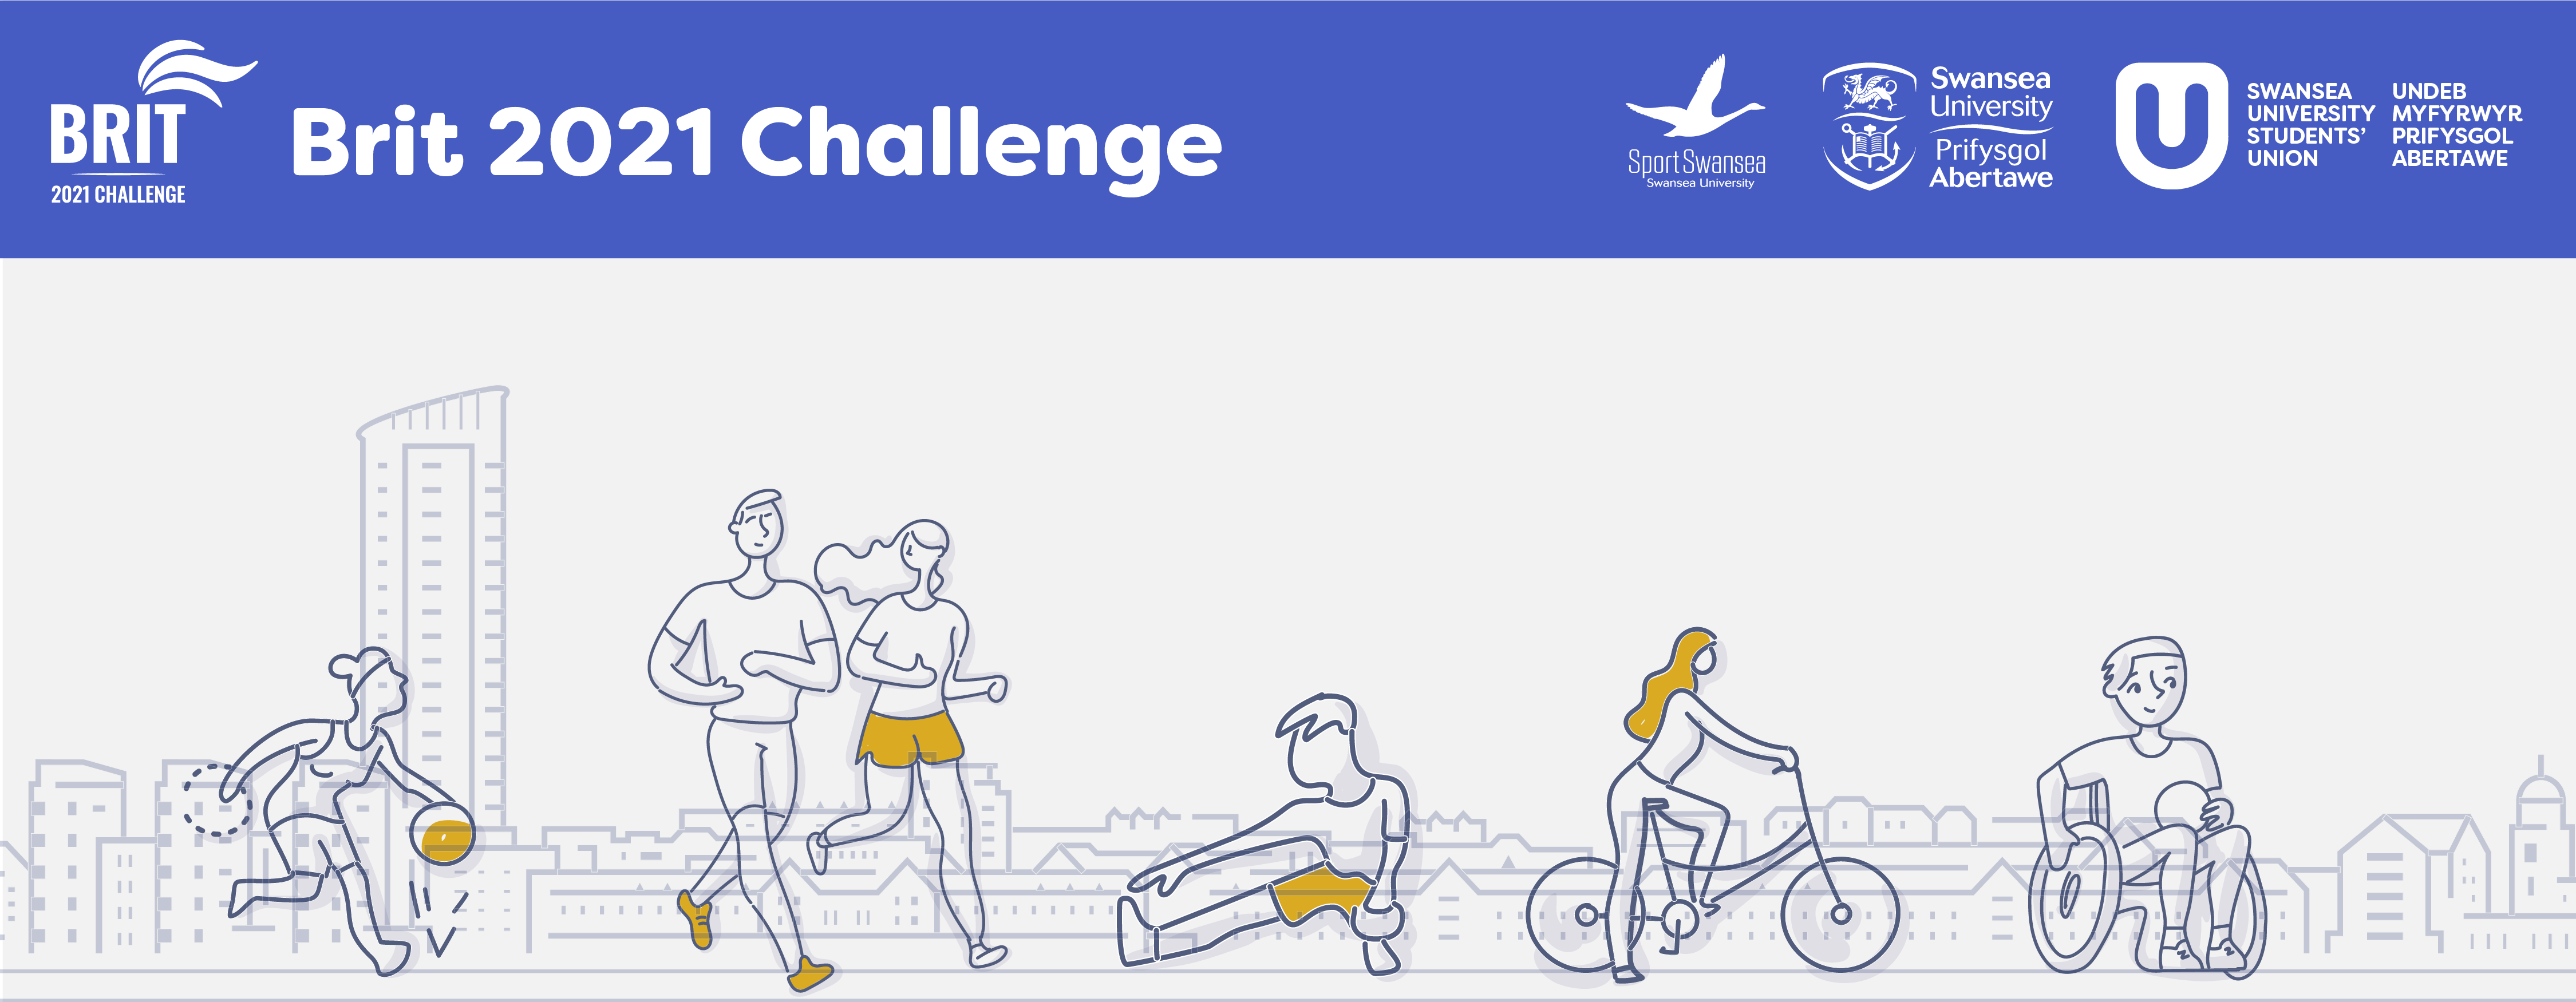 page header graphic and title for brit challenge 2021